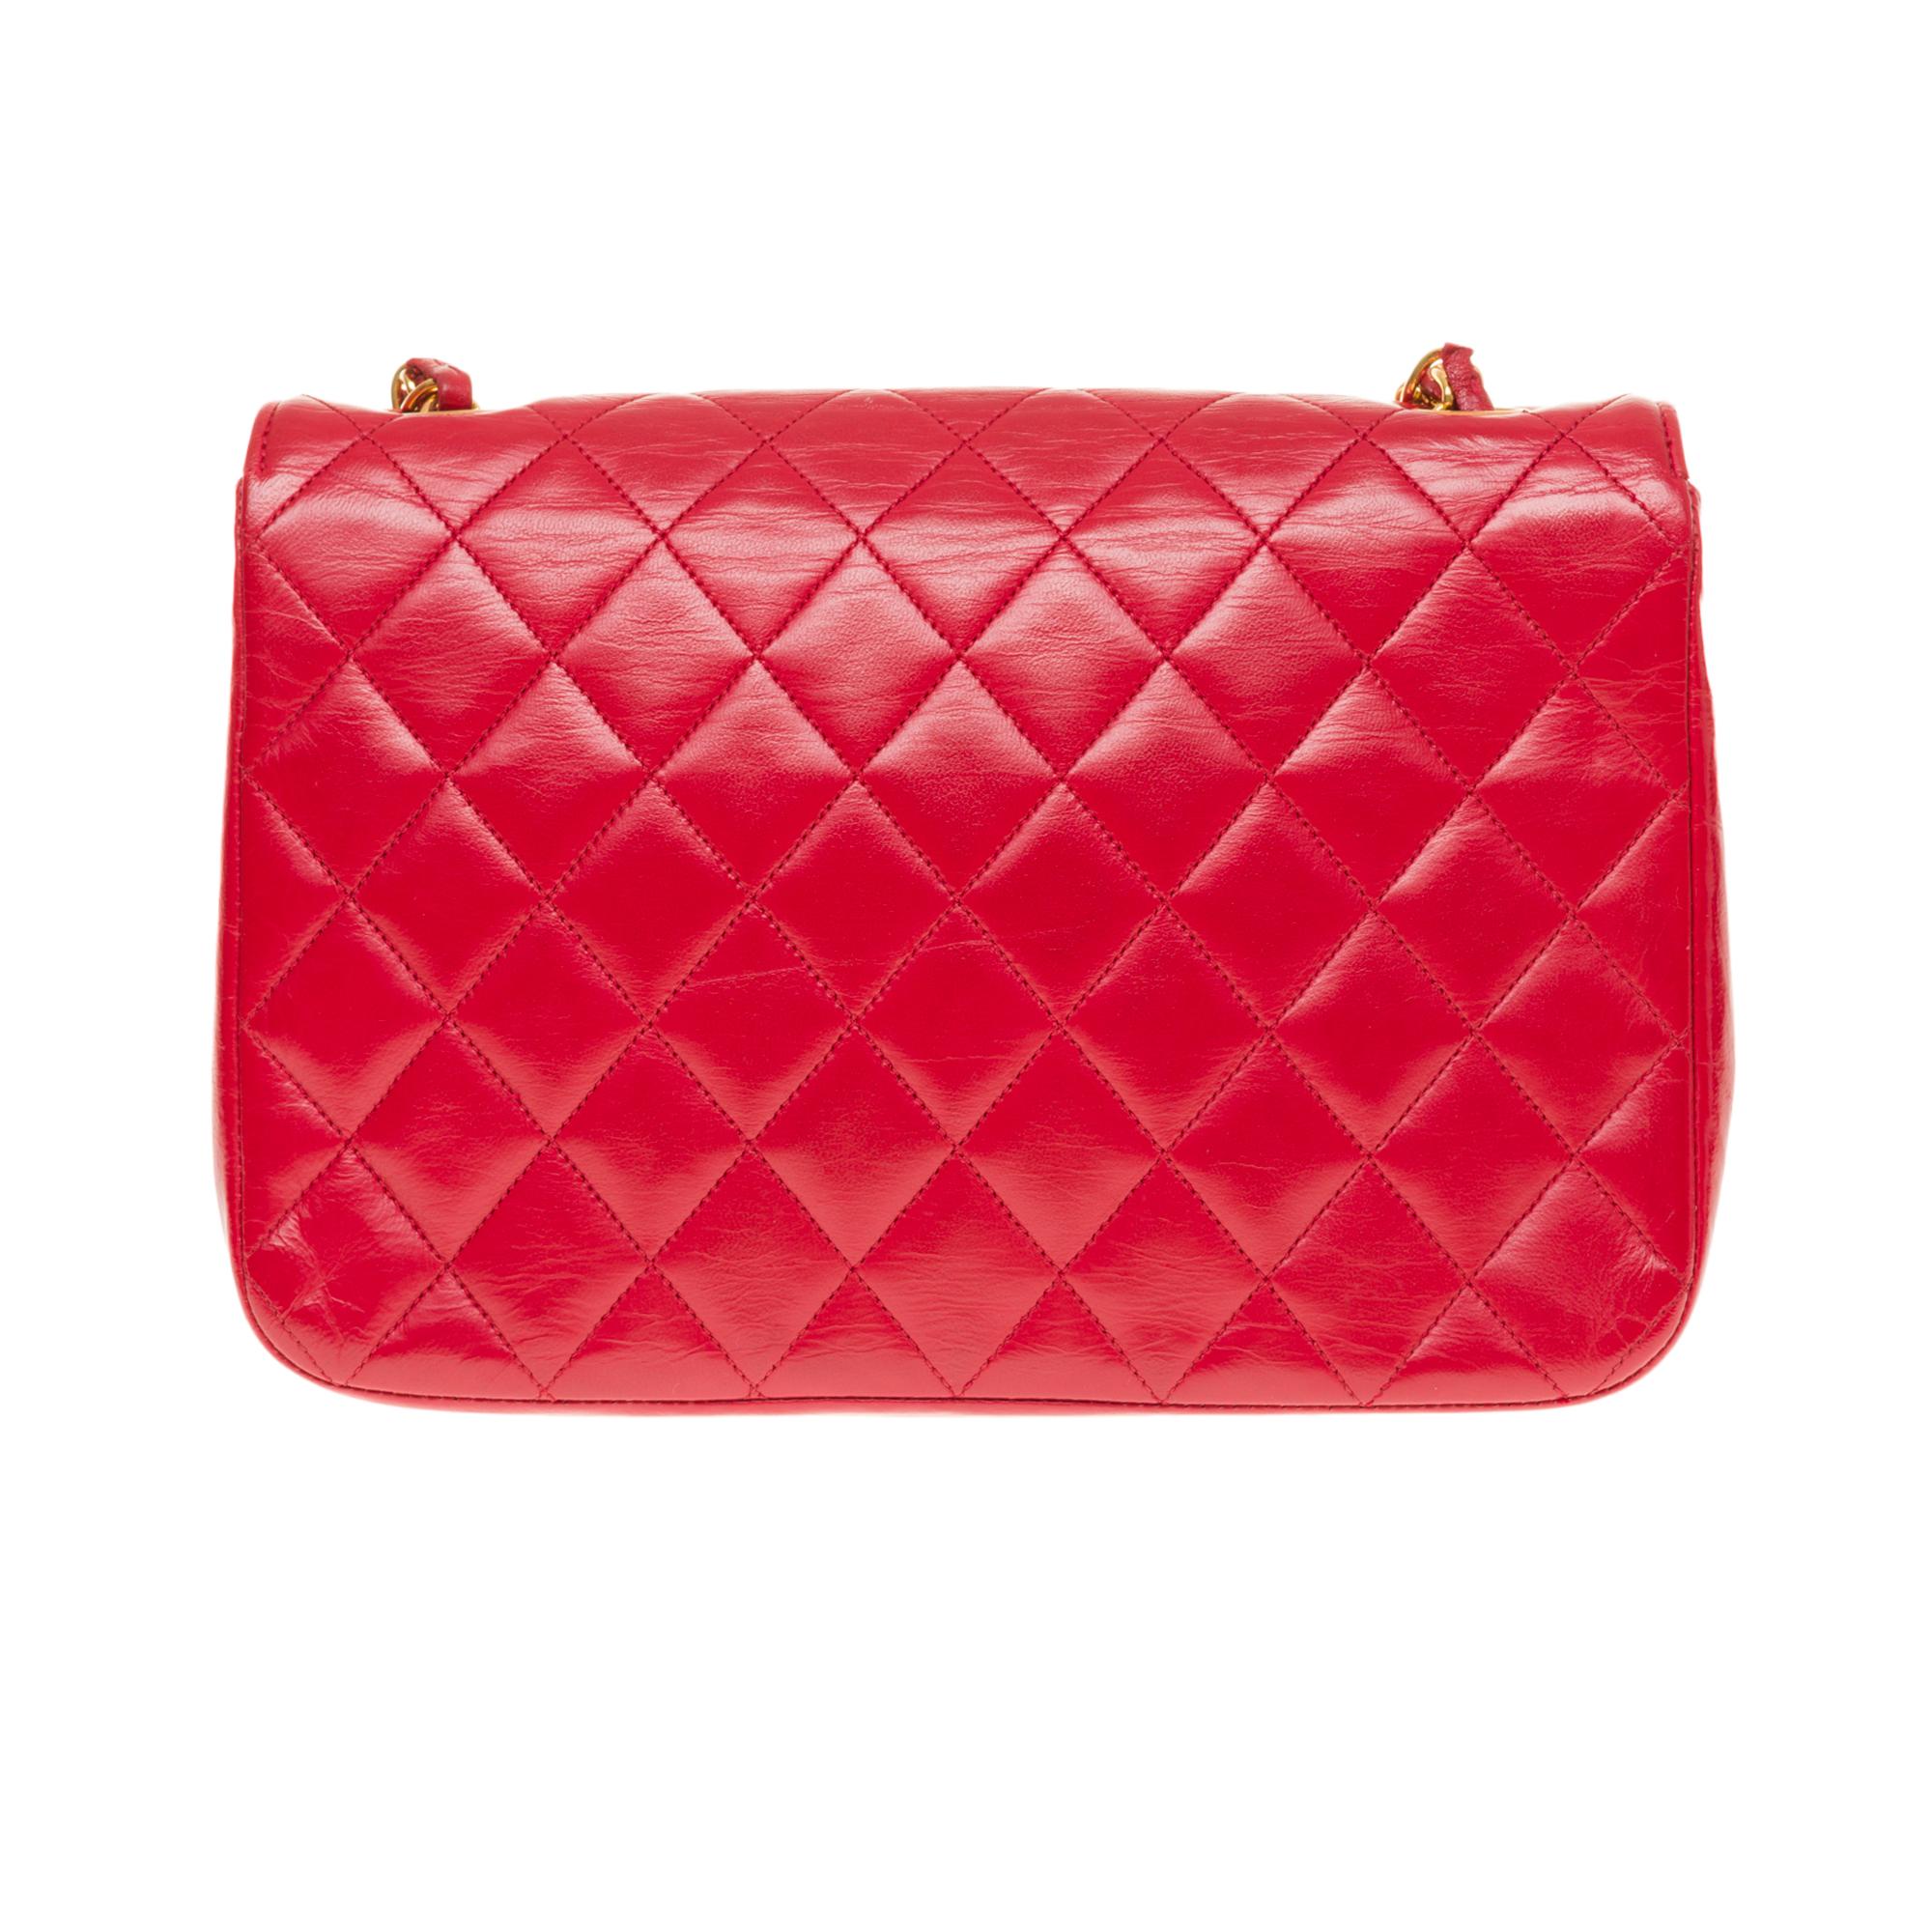 Splendid Chanel Classique shoulder bag with red quilted leather flap, gold-tone metal hardware, a gold-tone metal chain handle intertwined with red leather for shoulder support .
CC logo closure in gold metal on flap.
Lining in red leather, one zip